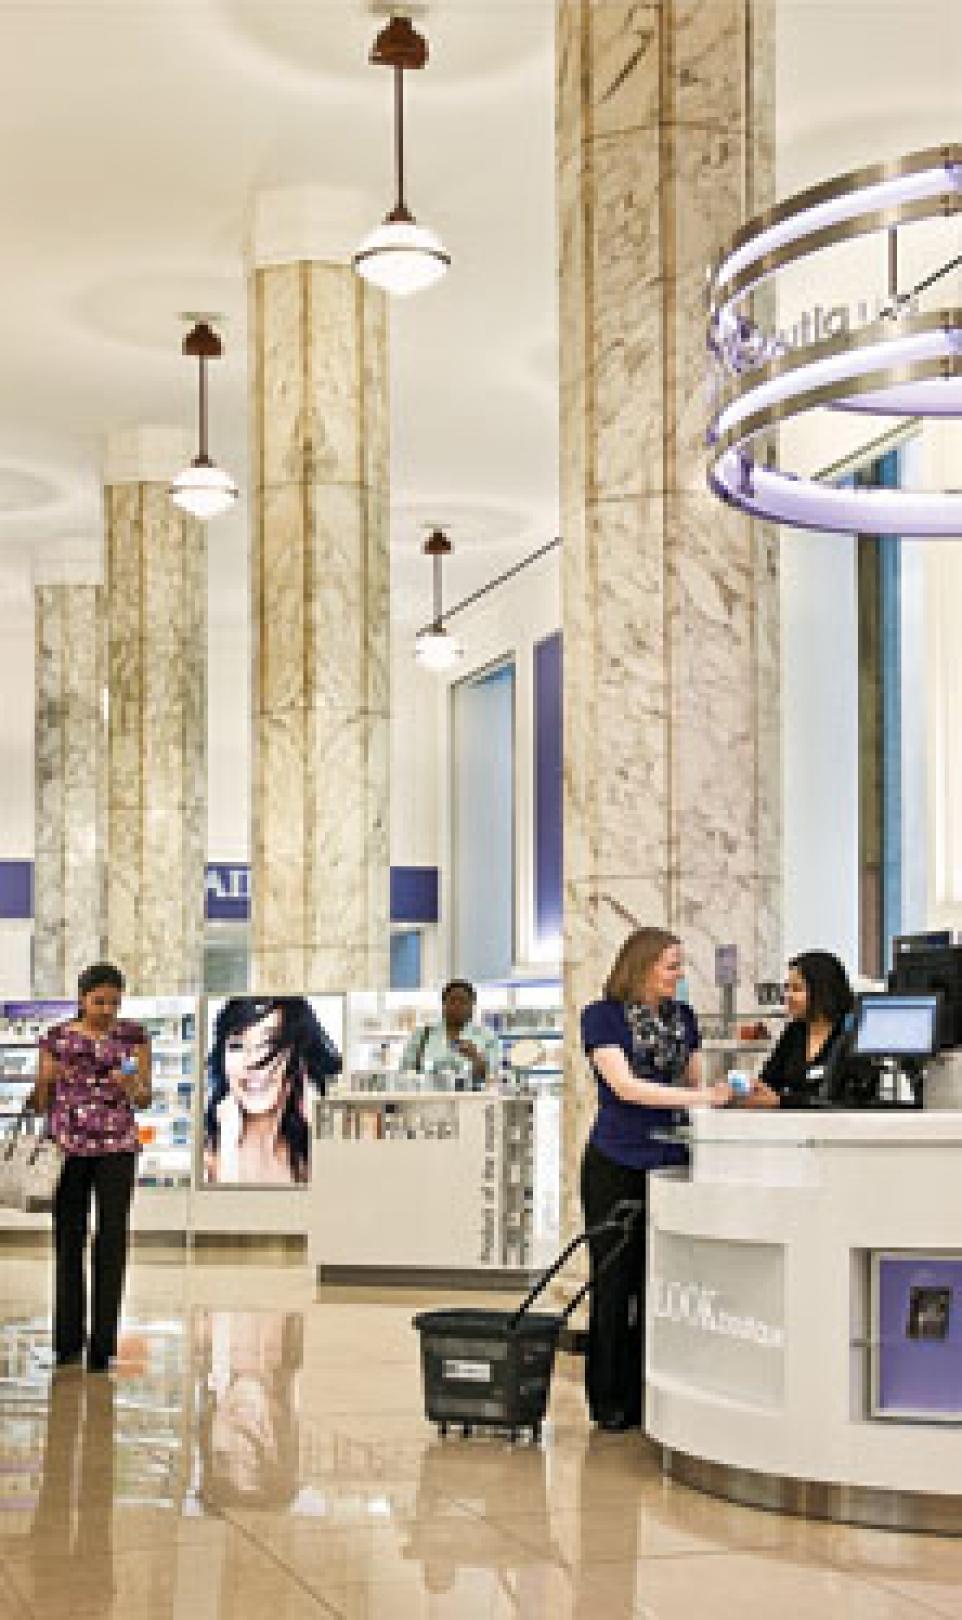 Picture of the grand reception area at Duane Reade's flagship store in New York